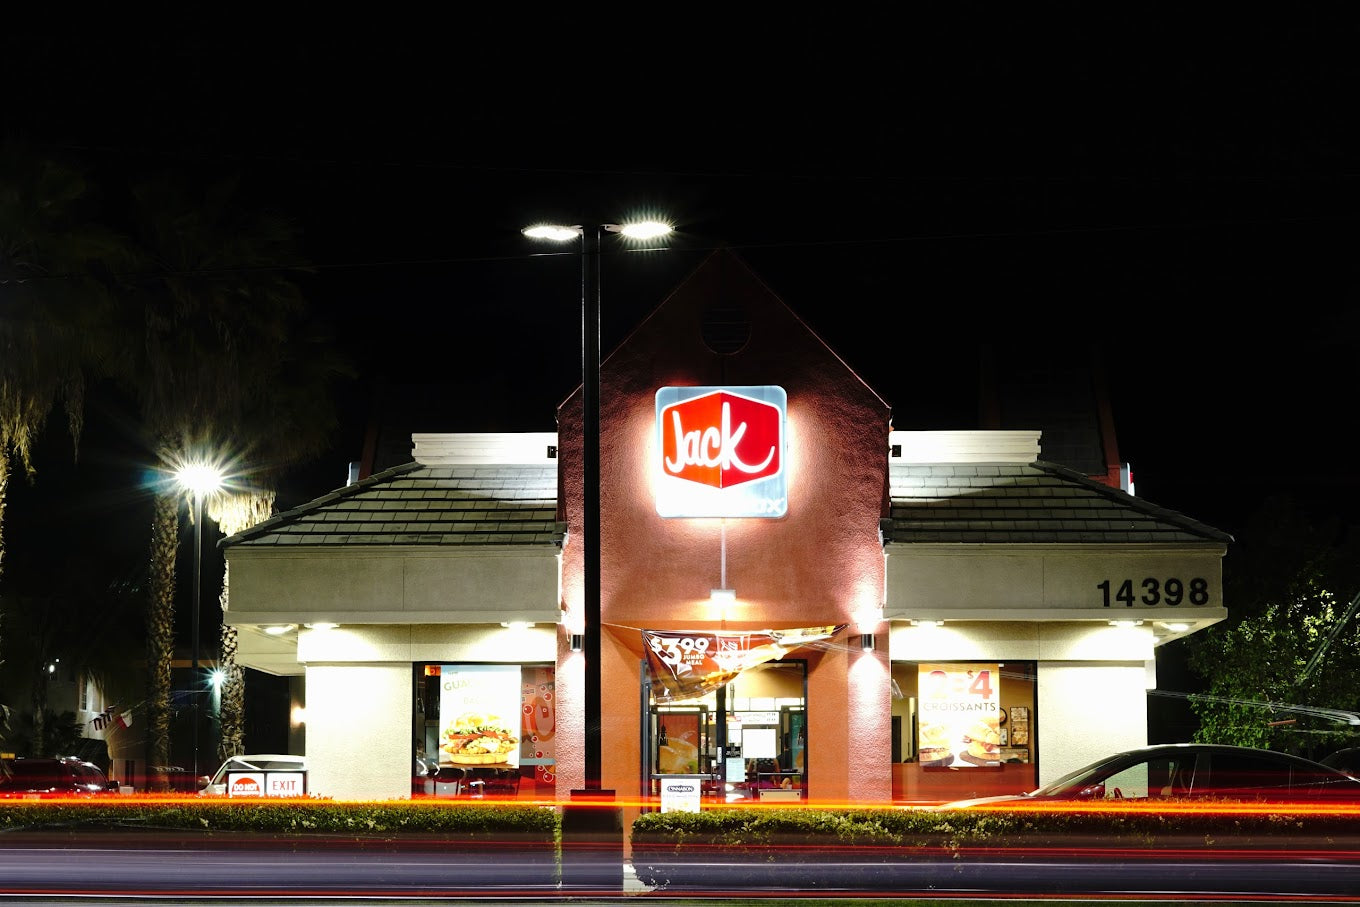 Image of Jack In The Box